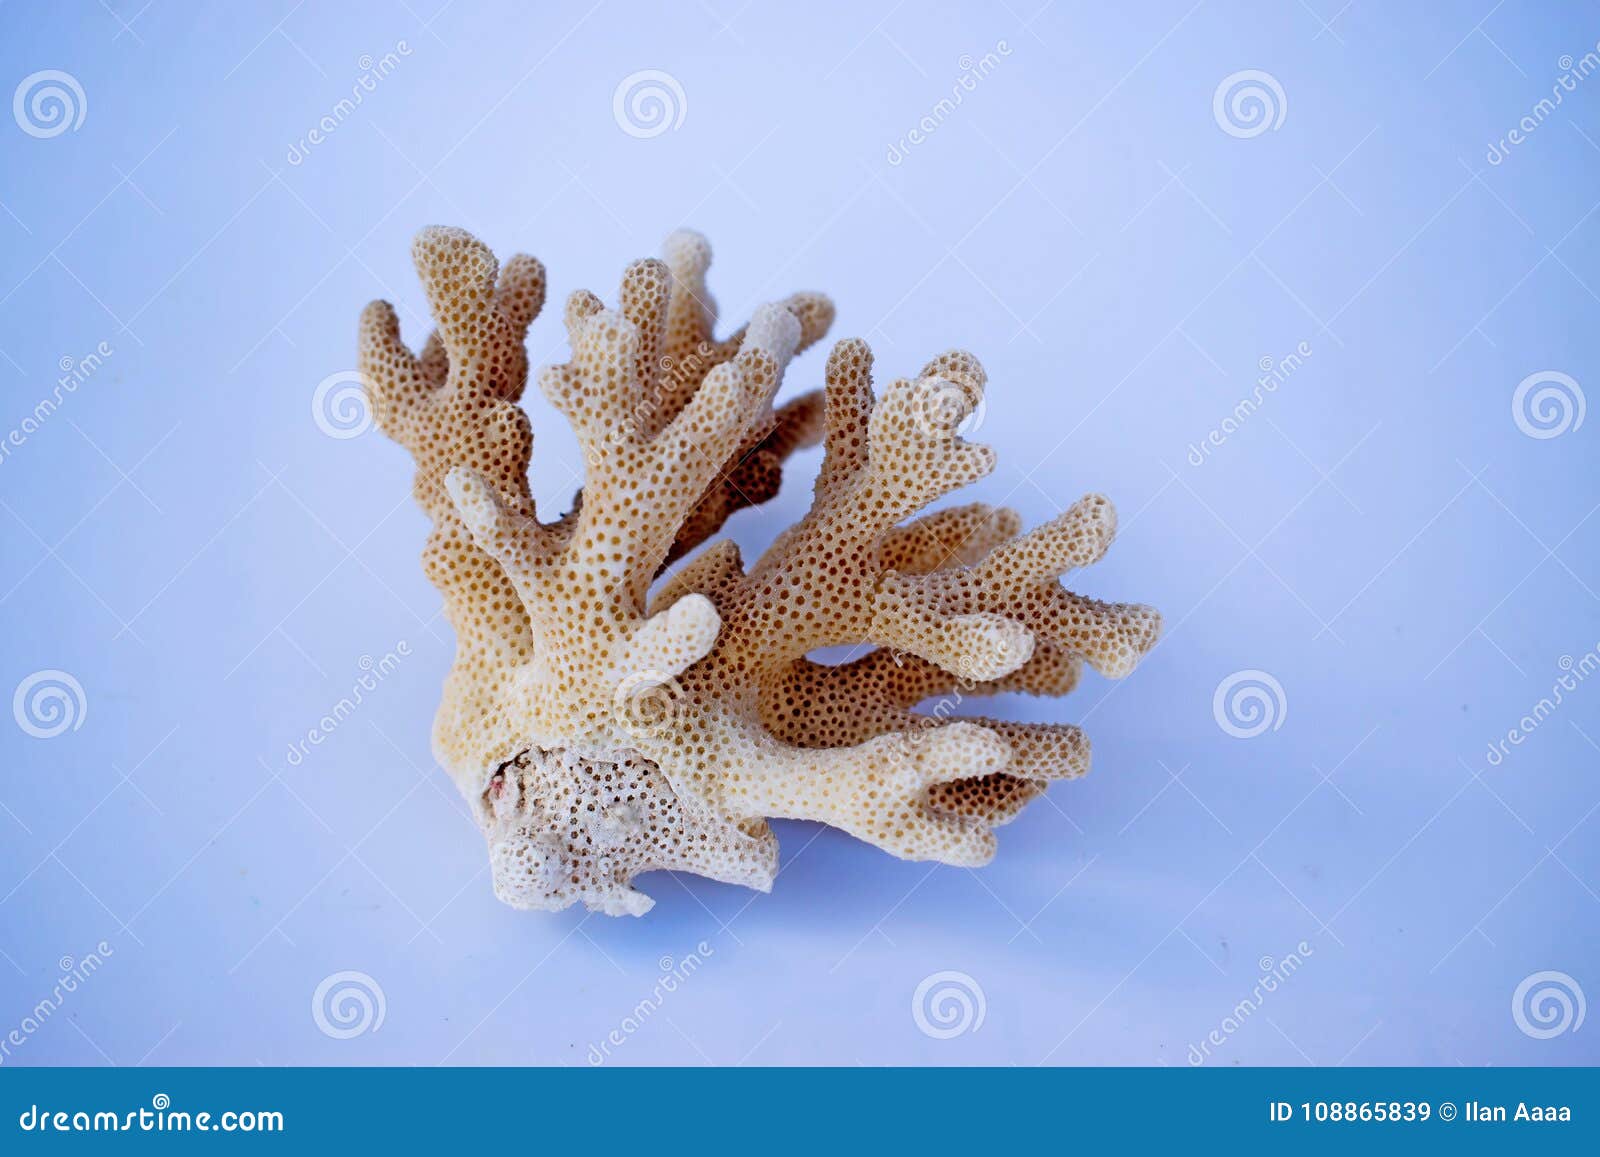 color coral on blue background